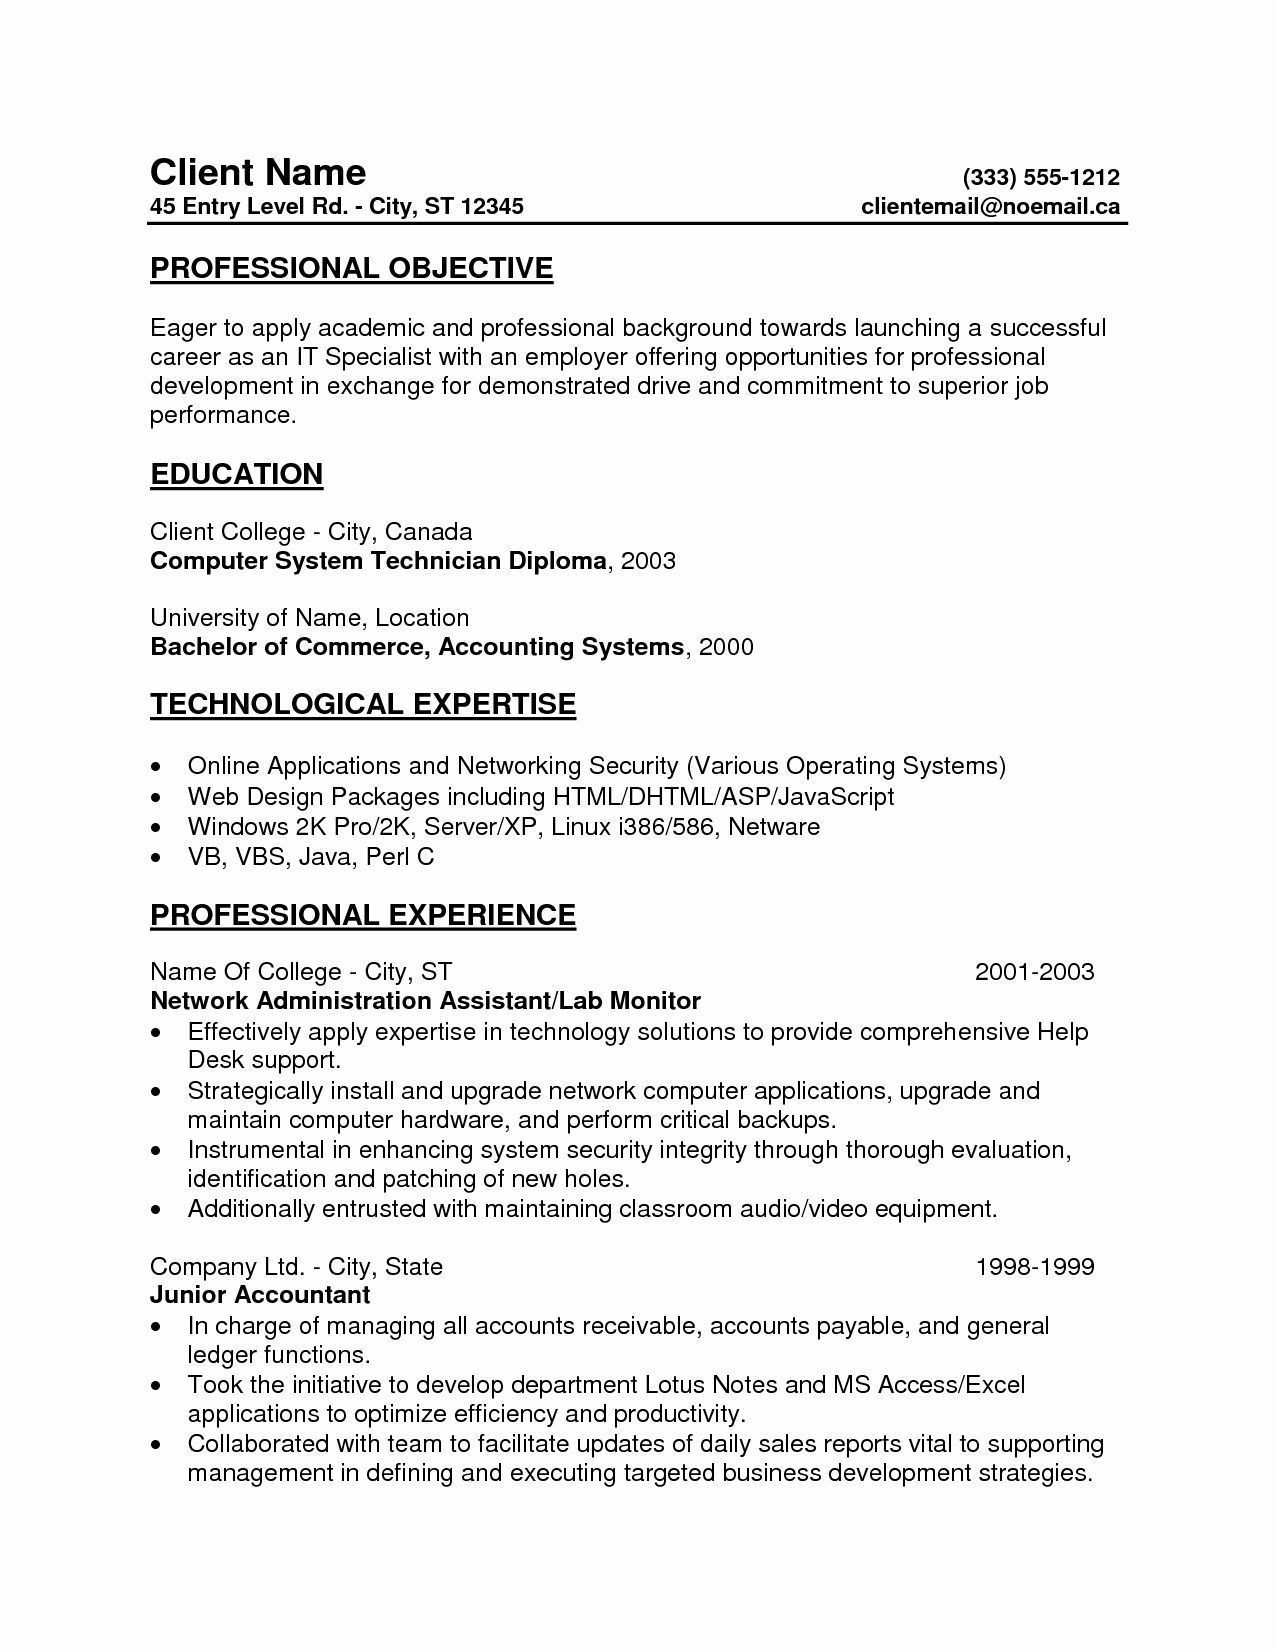 professional resume objective examplesml